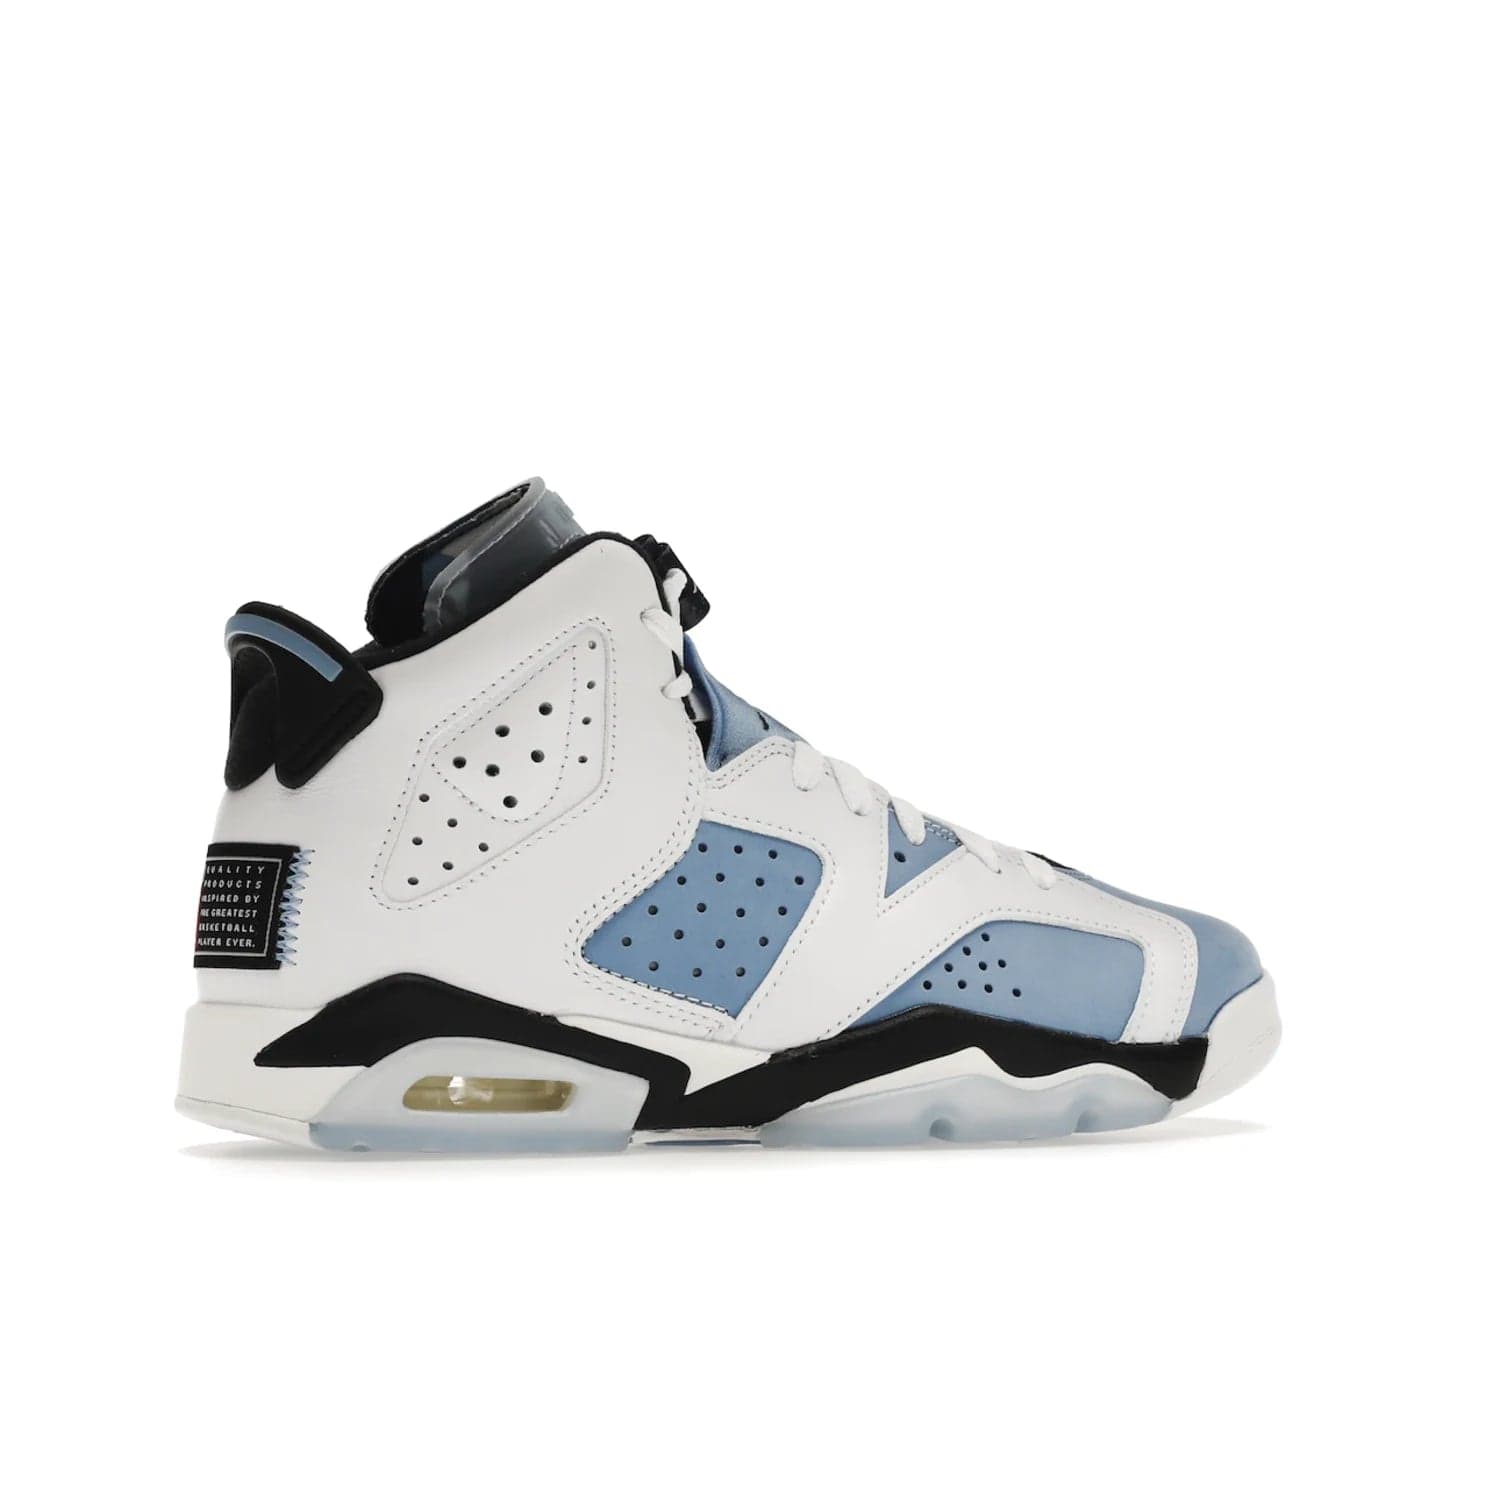 Jordan 6 Retro UNC White (GS) - Image 35 - Only at www.BallersClubKickz.com - Air Jordan 6 Retro UNC White GS: Michael Jordan alma mater, UNC Tar Heels, featuring colorway, nubuck, leather, Jumpman branding and a visible Air unit. Translucent blue/white outsole, perfect for completing sneaker rotation.